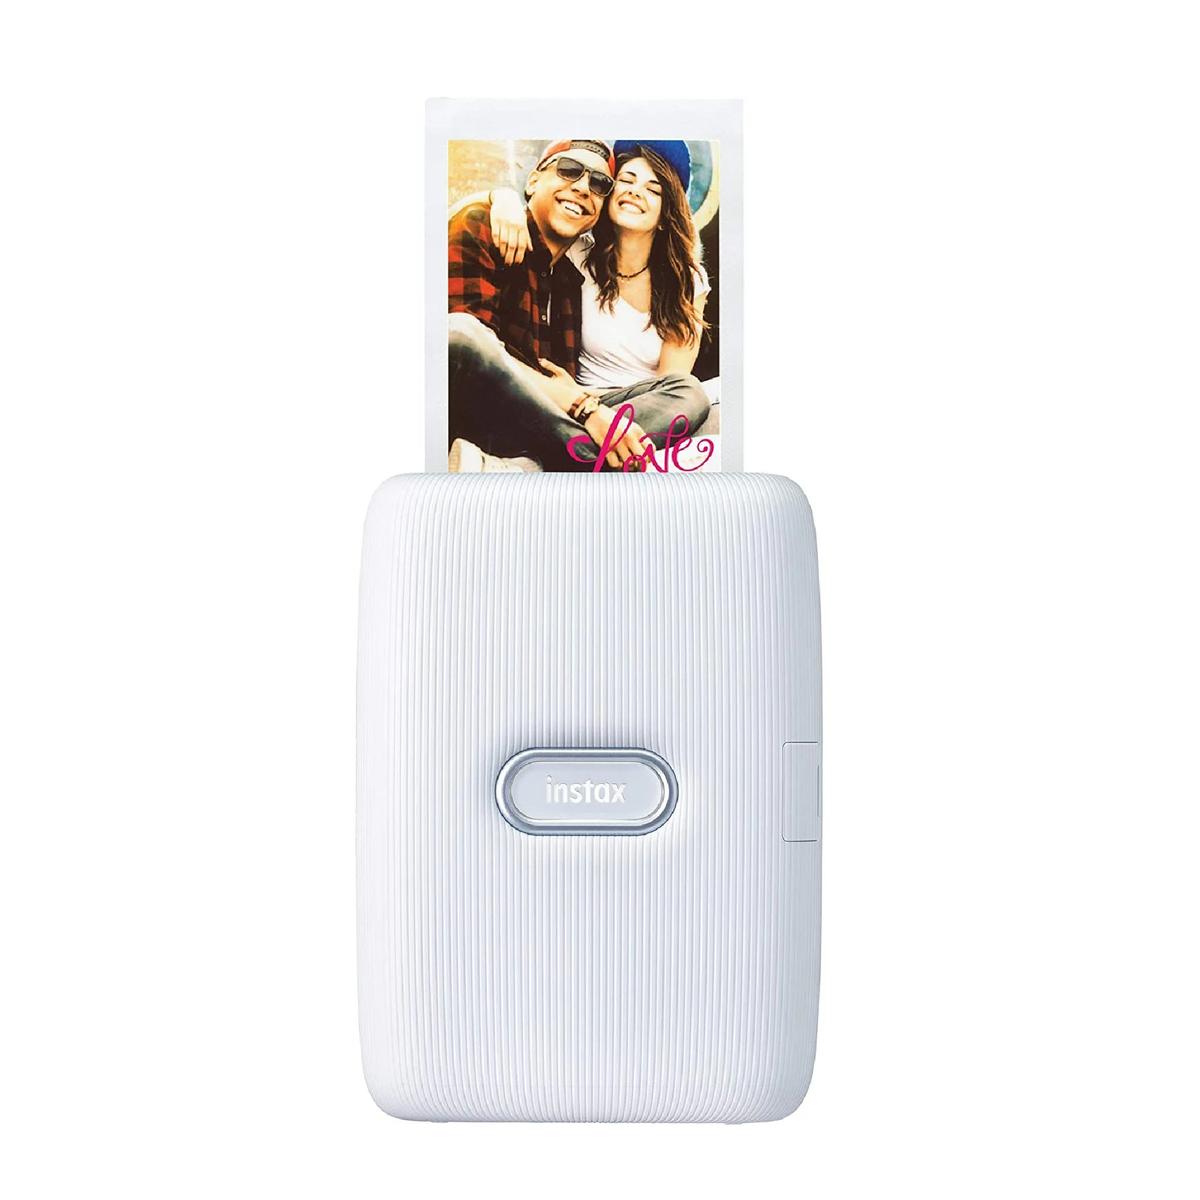 Wouldn’t it be great if you could print all those photos on your phone? With an Instax Mini Link printer, you can. (Courtesy of Fujifilm Instax)